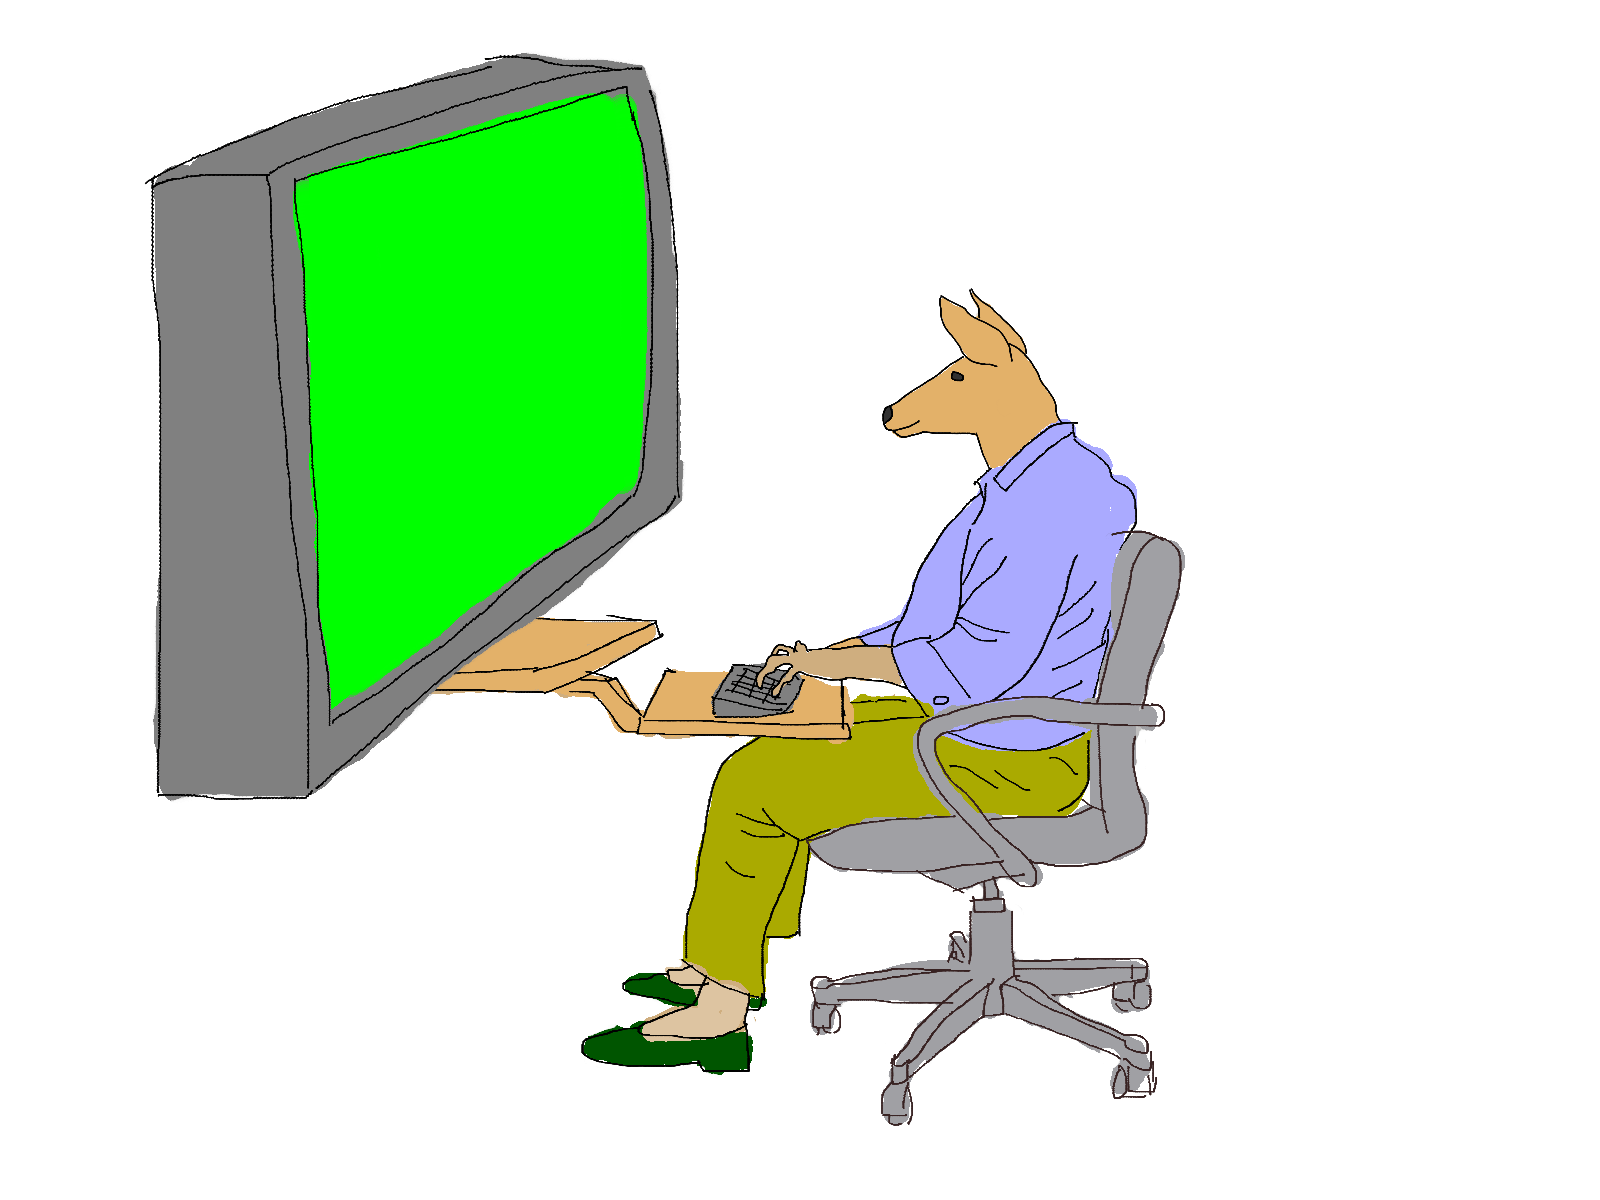 A drawing of a man with the head of a dear sitting in front of a large computer typing.